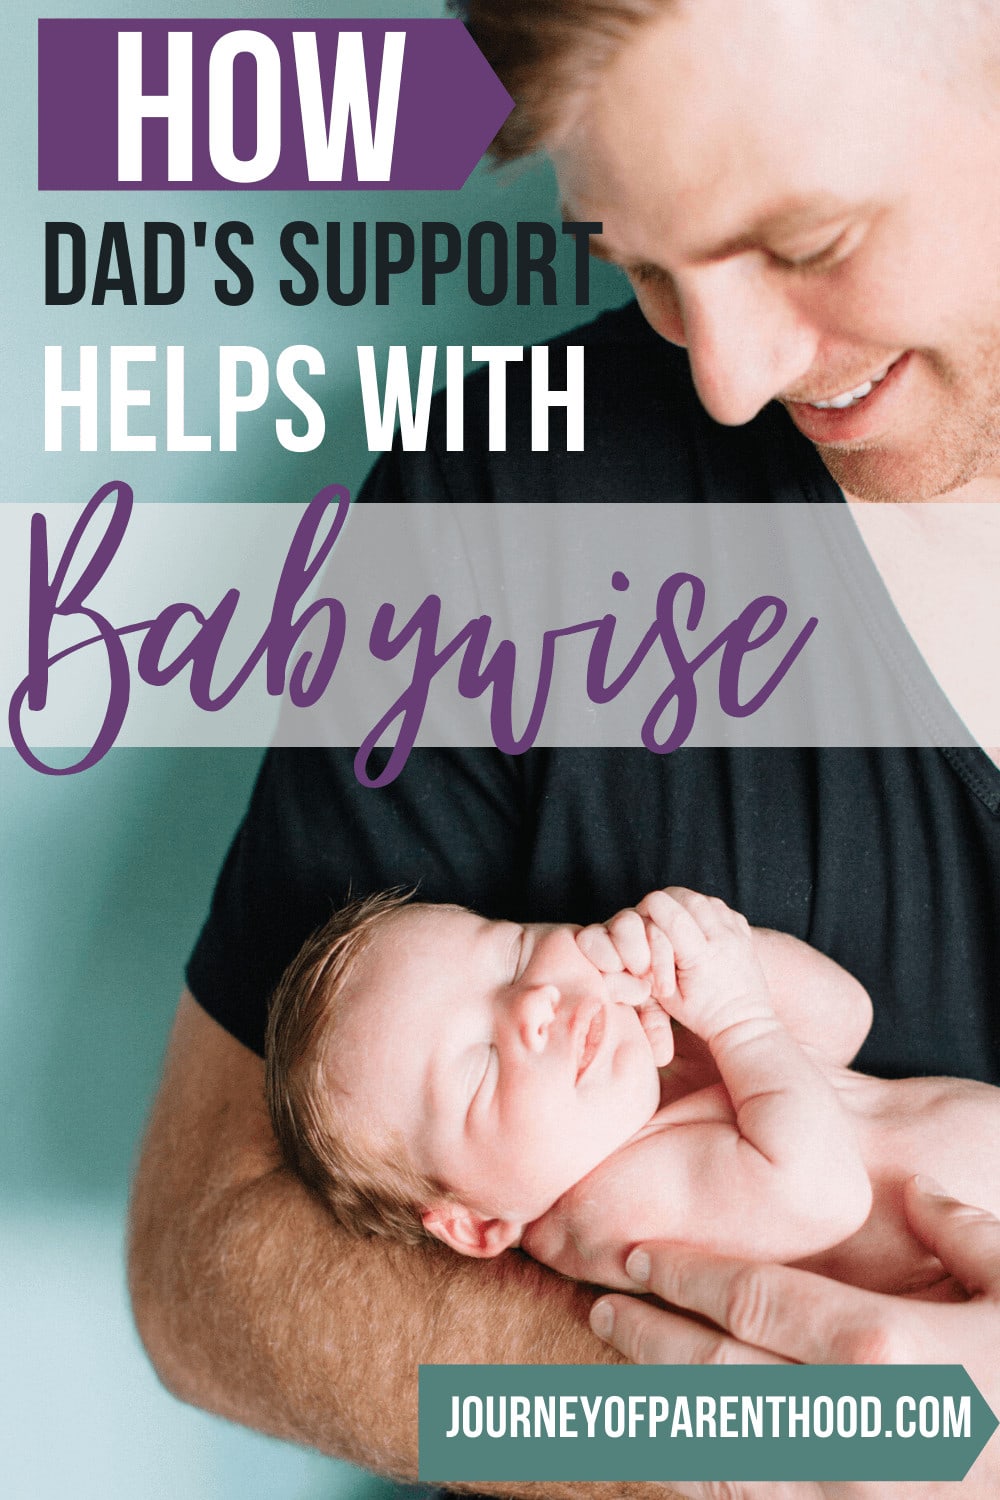 Dad's Support with Babywise